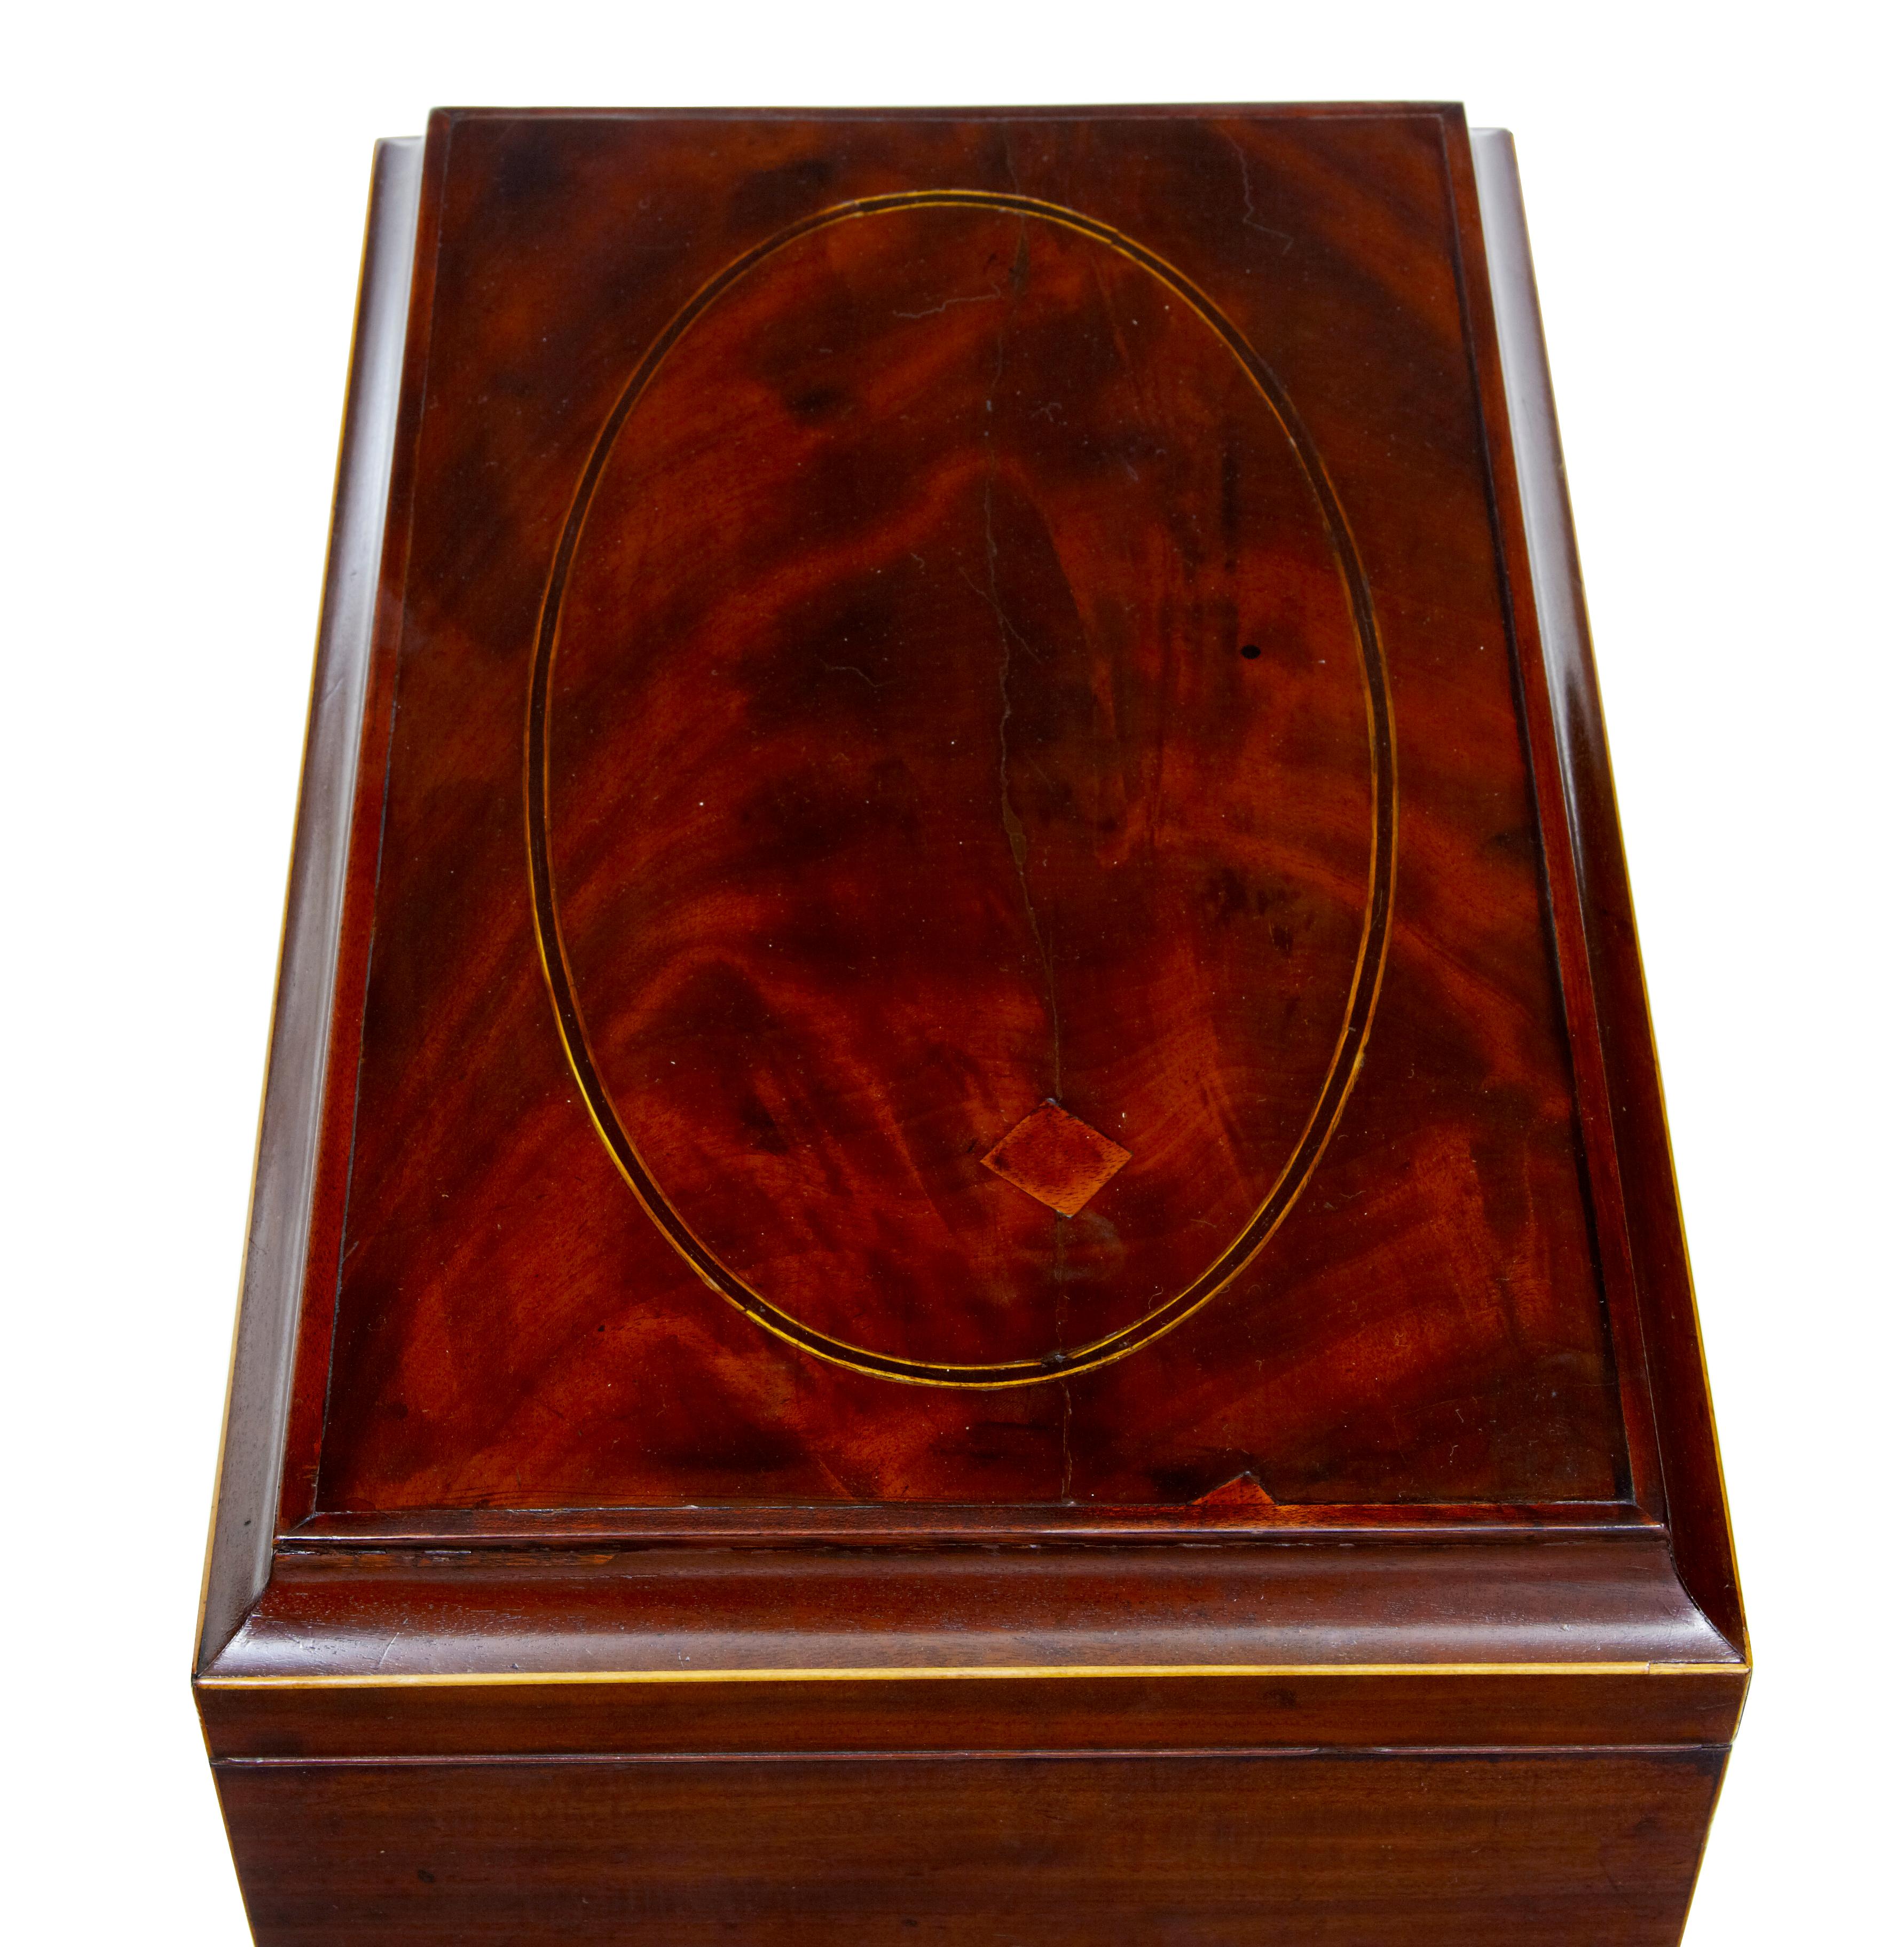 Hand-Crafted Early 20th Century Edwardian Mahogany Inlaid Wine Cooler